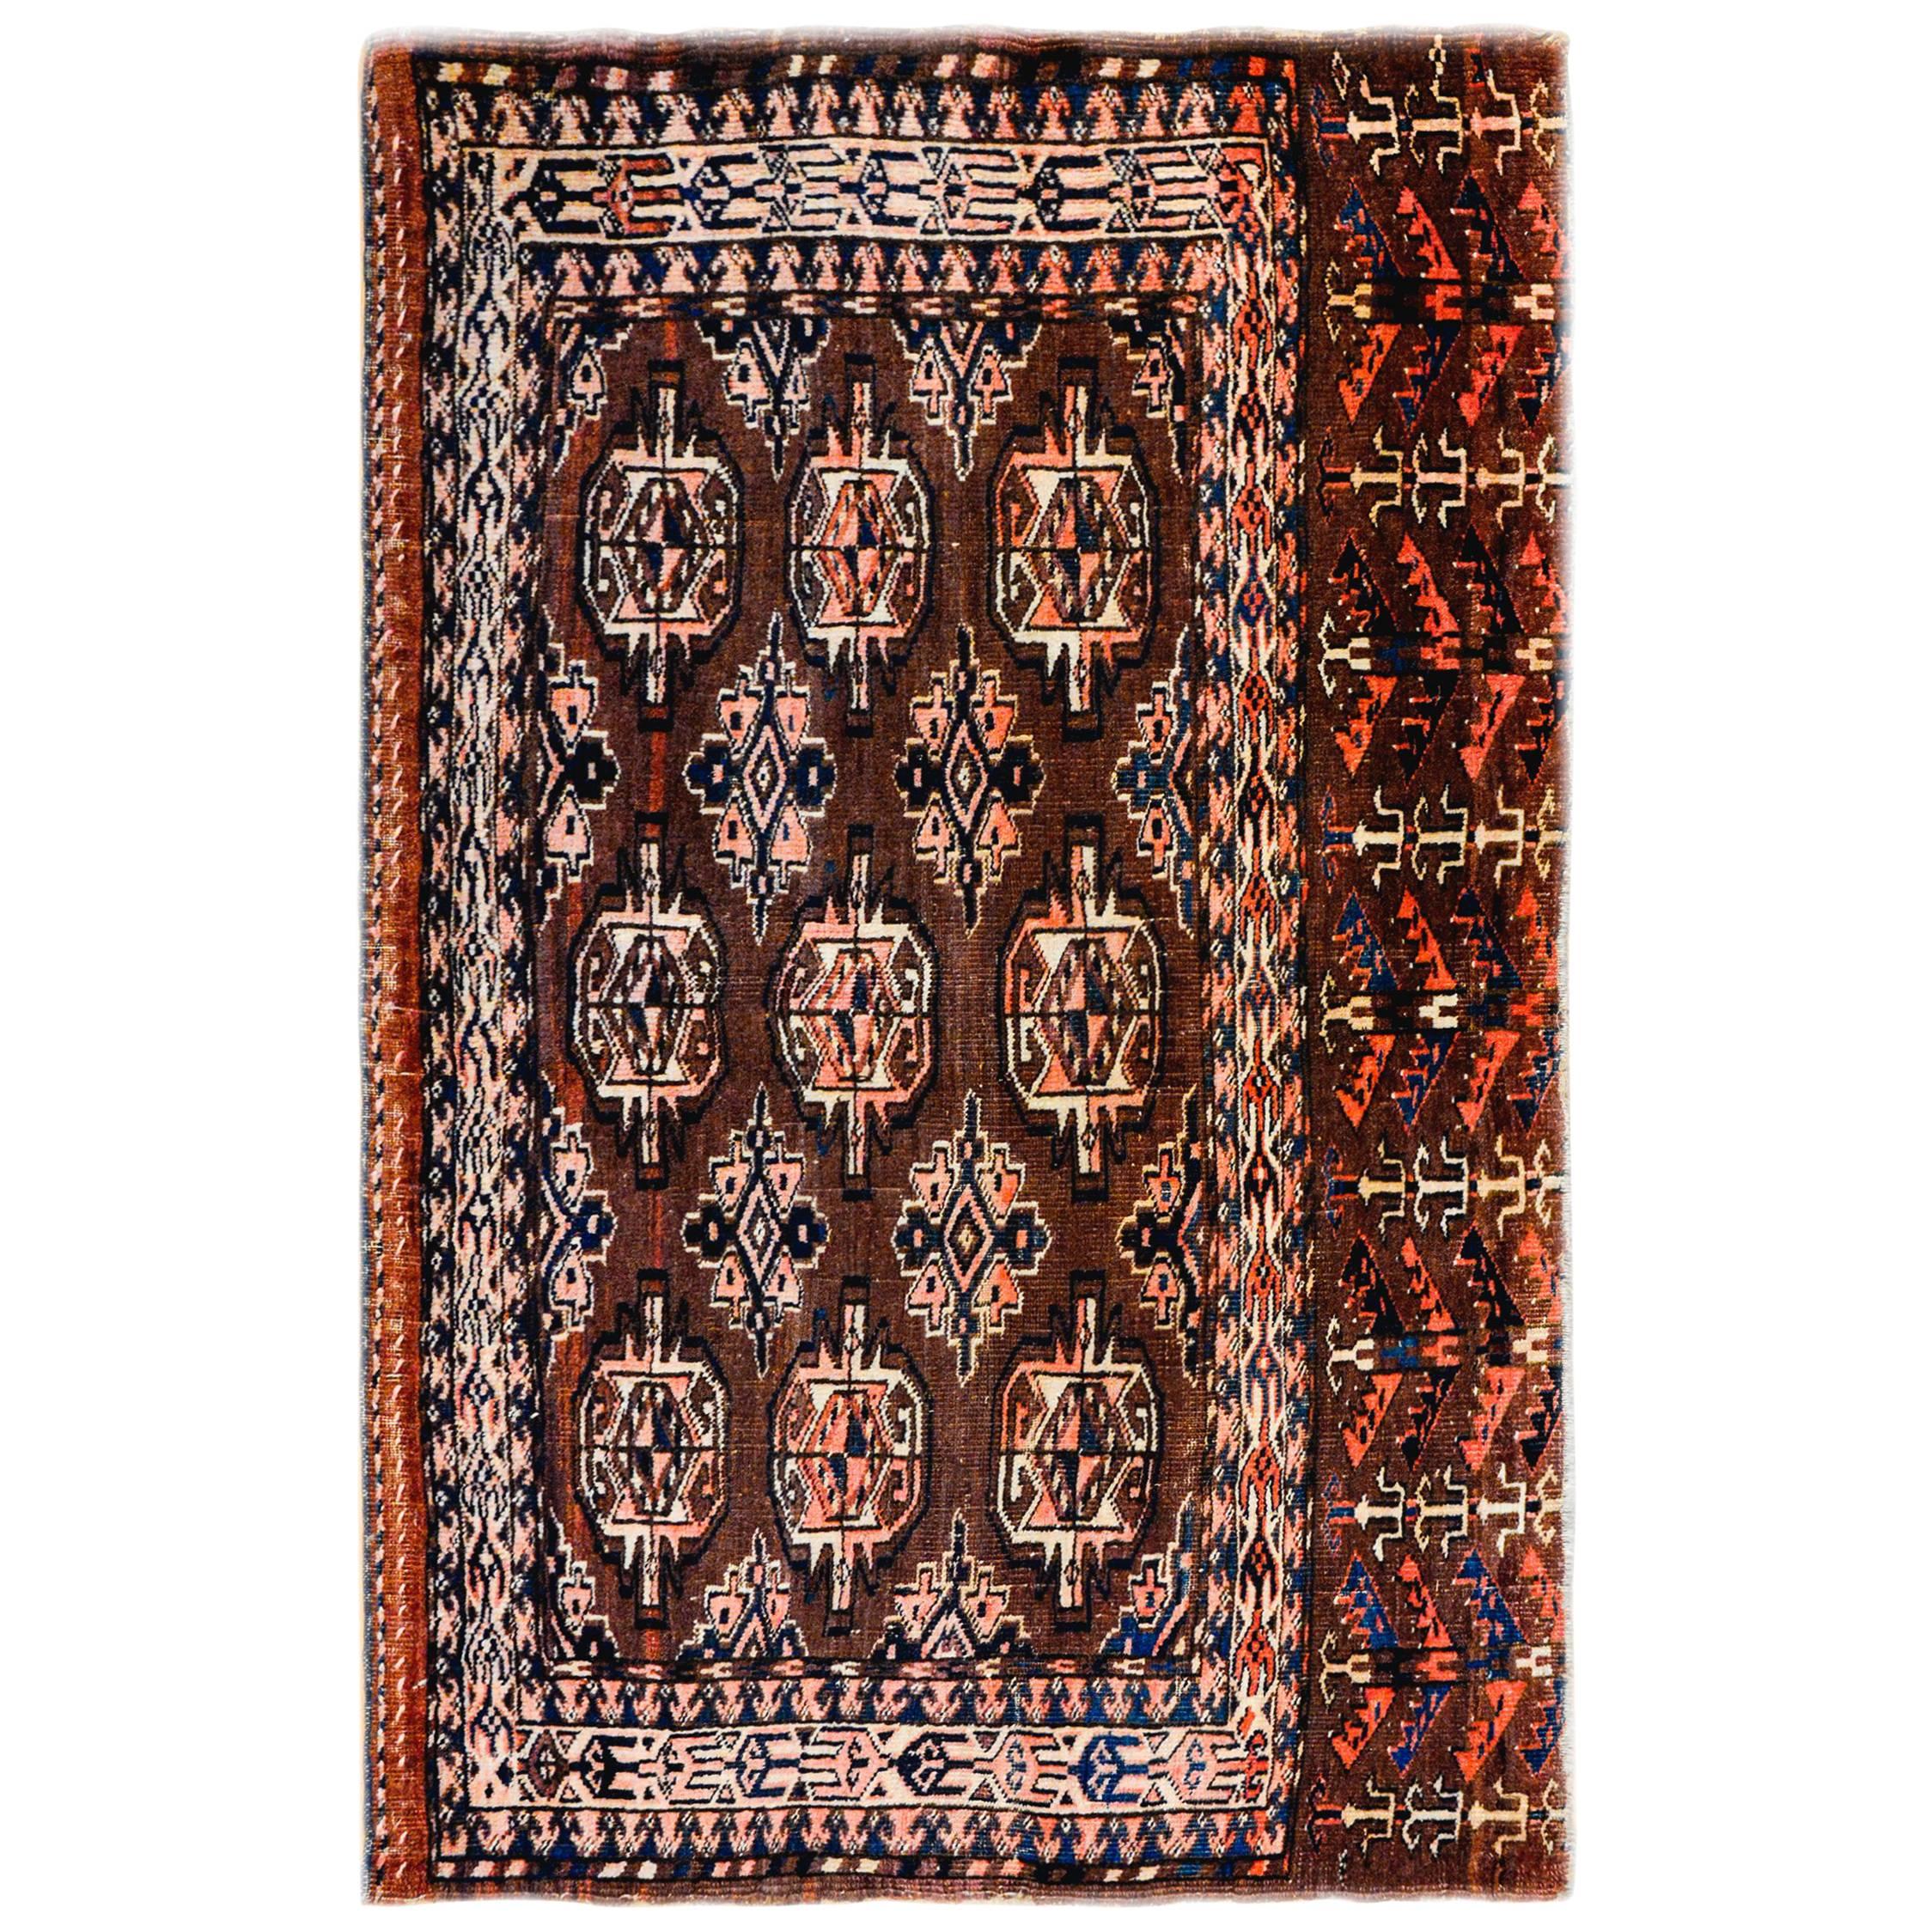 Early 20th Century Yamout Rug